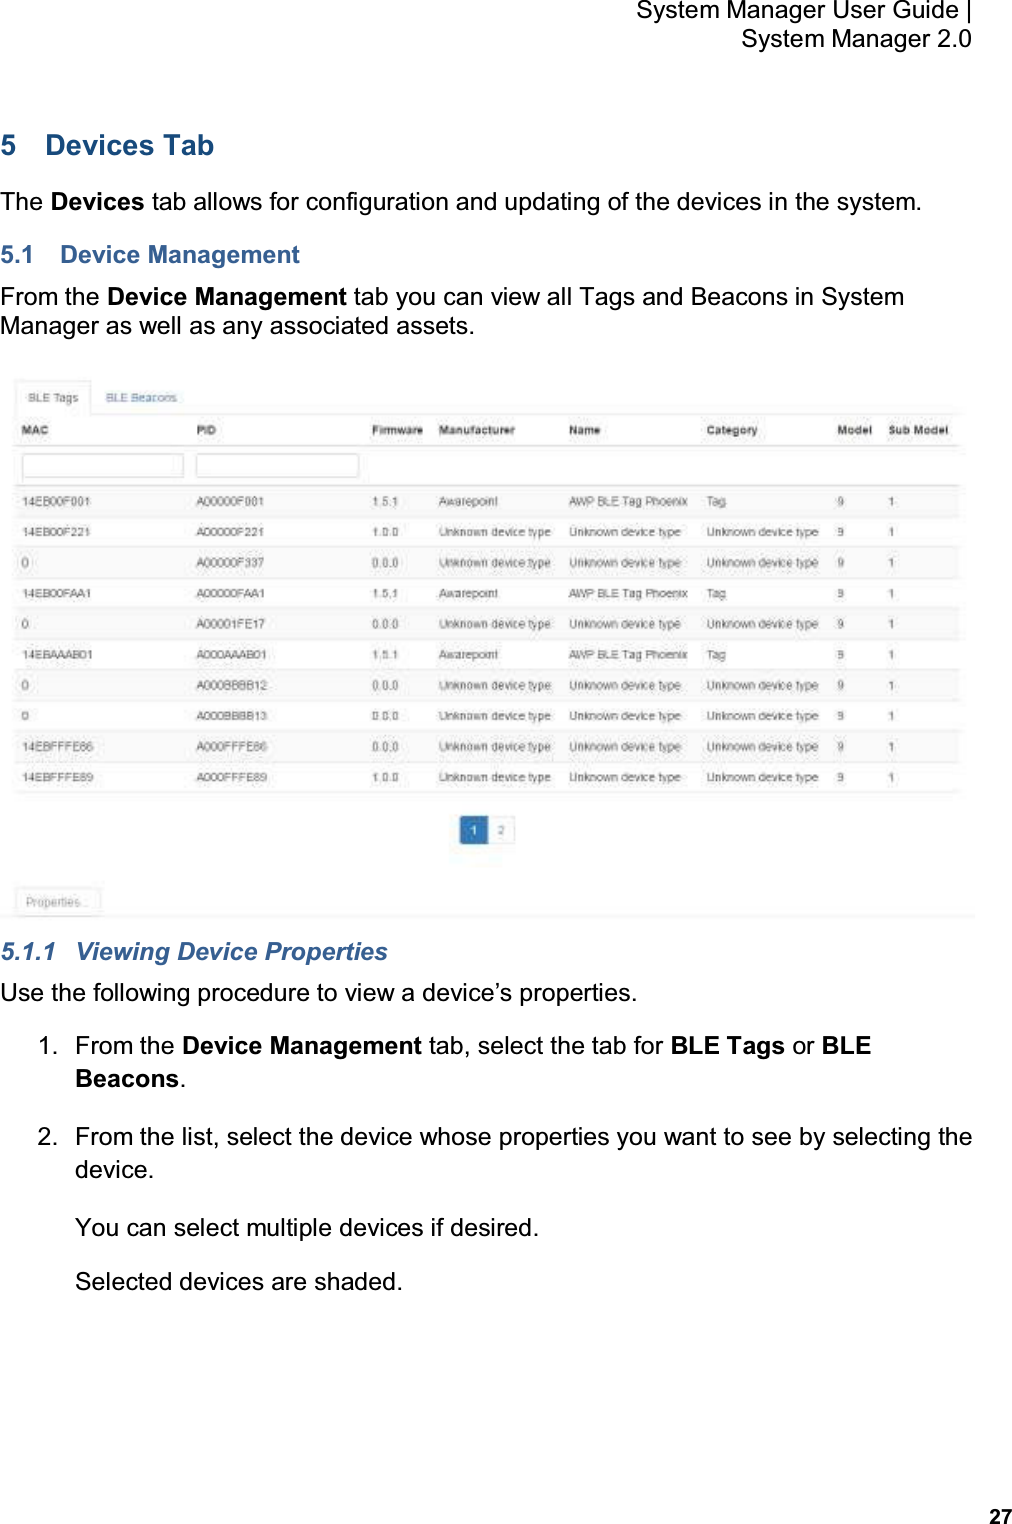           27 System Manager User Guide |  System Manager 2.0 5  Devices Tab The Devices tab allows for configuration and updating of the devices in the system. 5.1  Device Management From the Device Management tab you can view all Tags and Beacons in System Manager as well as any associated assets.  5.1.1  Viewing Device Properties Use the following procedure to view a device’s properties. 1.  From the Device Management tab, select the tab for BLE Tags or BLE Beacons. 2.  From the list, select the device whose properties you want to see by selecting the device. You can select multiple devices if desired. Selected devices are shaded. 